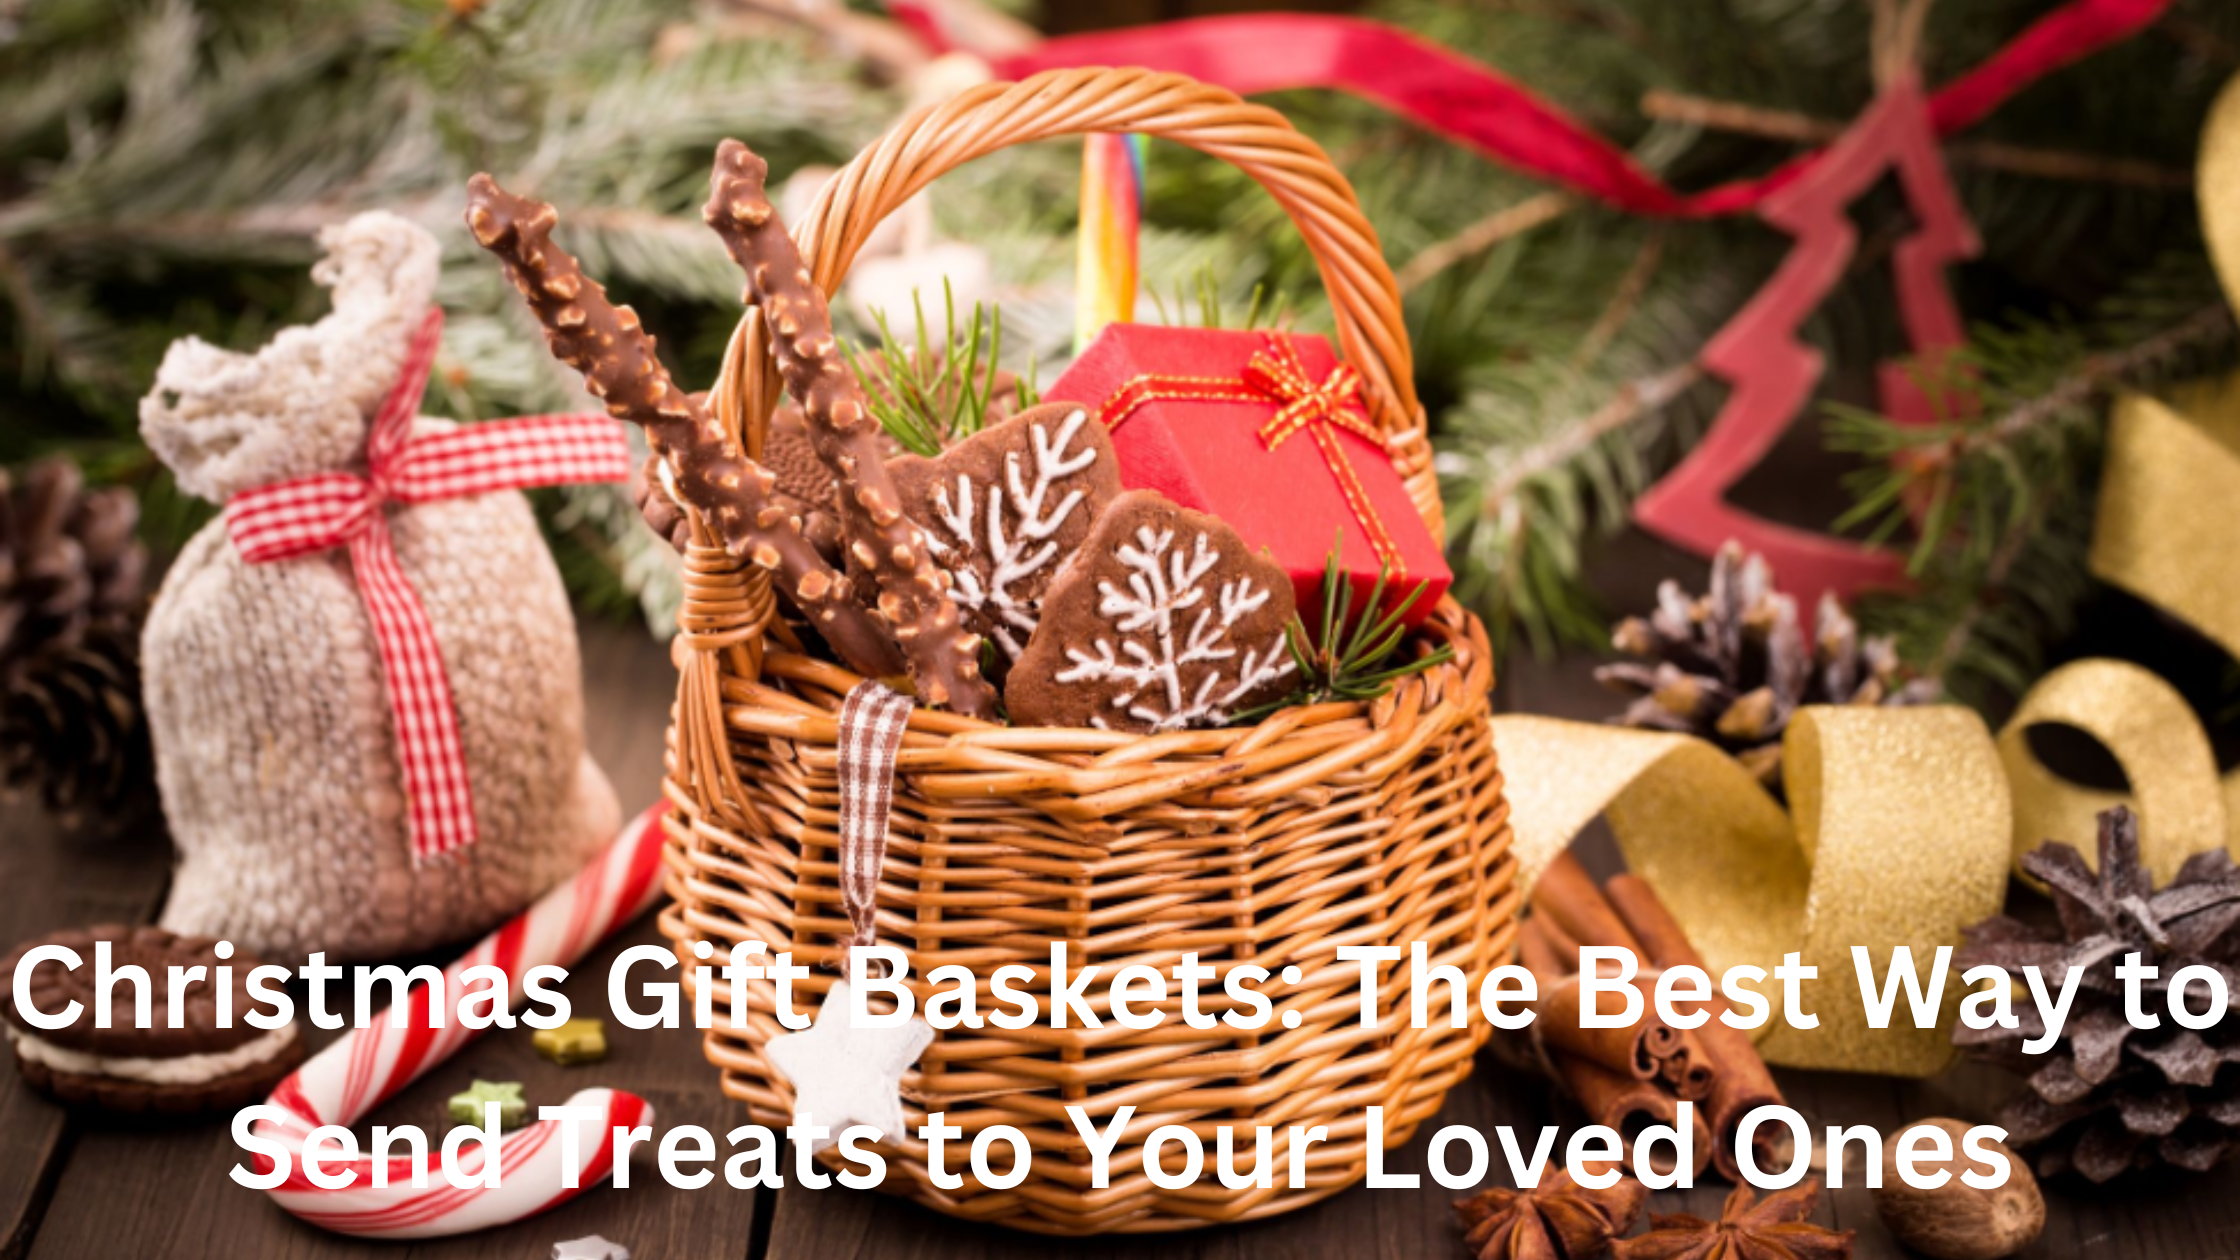 Christmas Gift Baskets The Best Way to Send Treats to Your Loved Ones.